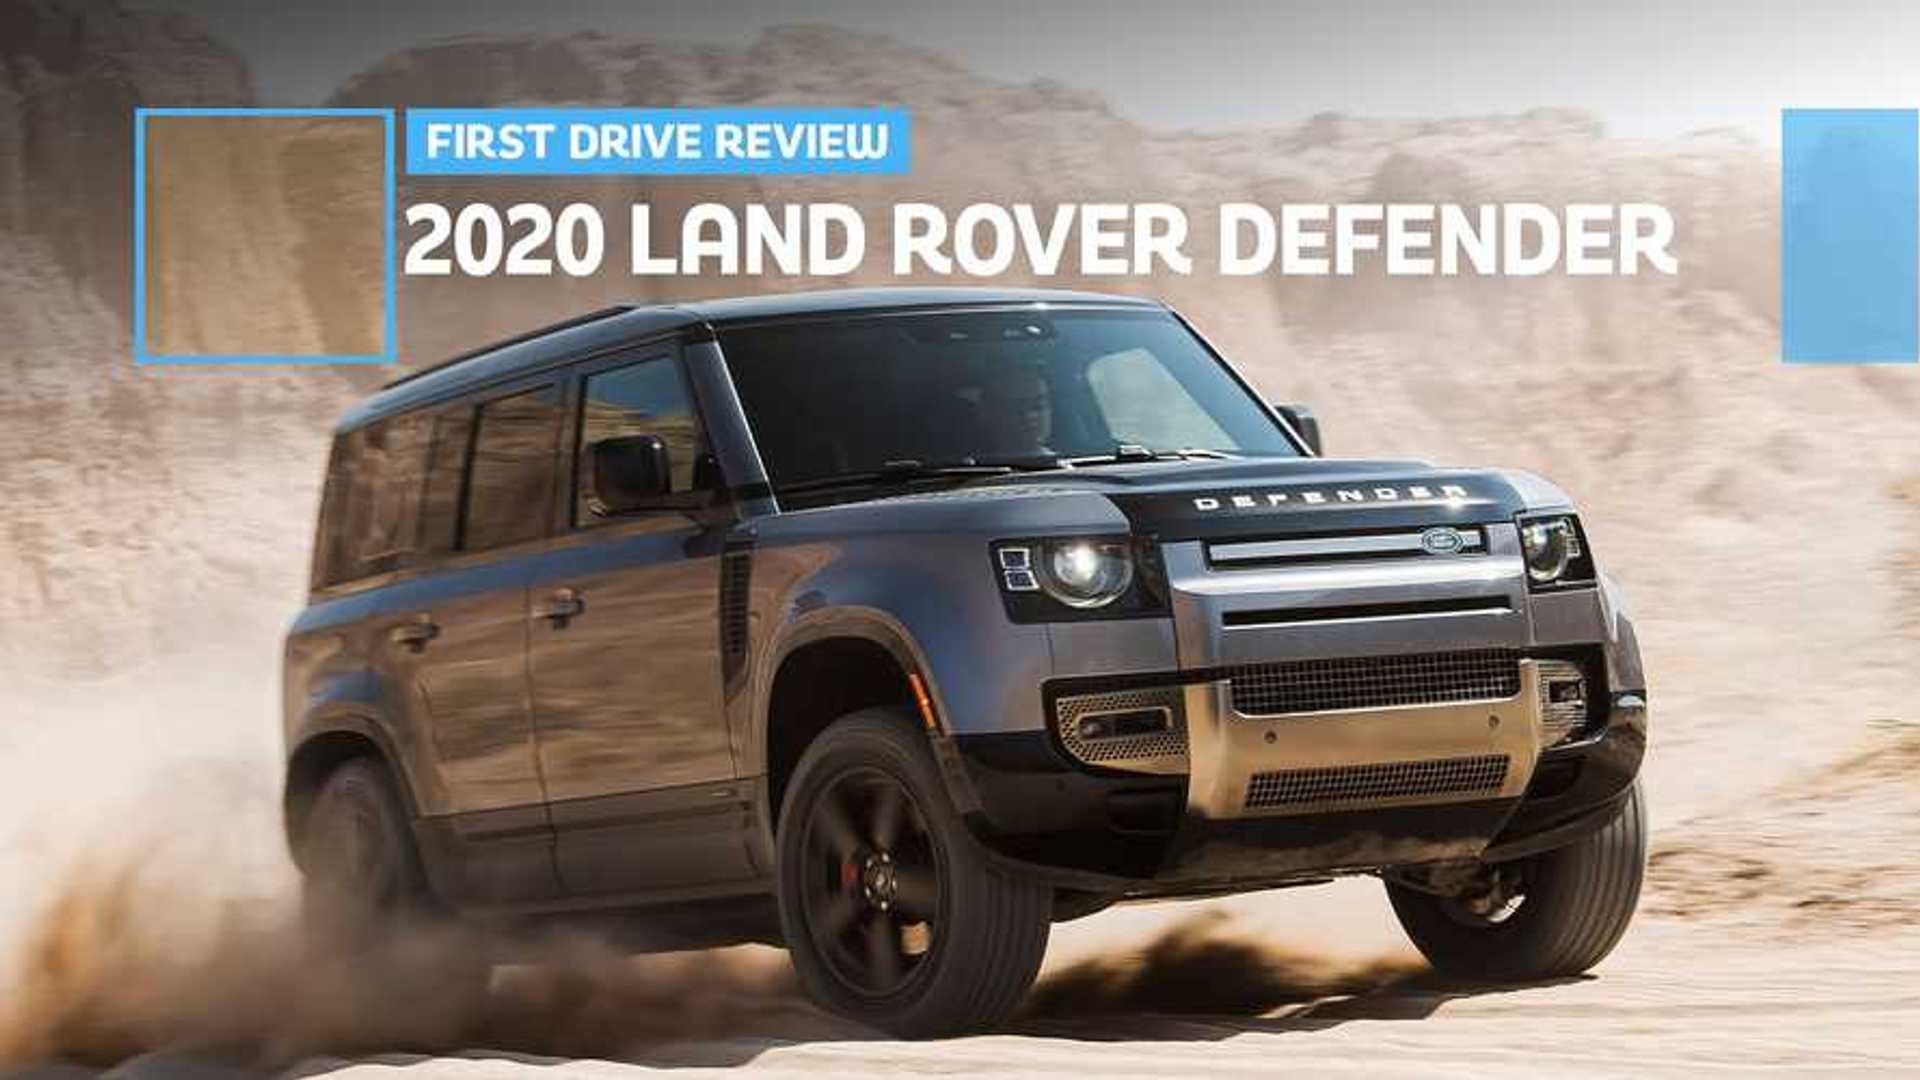 2020 Land Rover Defender First Drive Review: Playing In The Sand